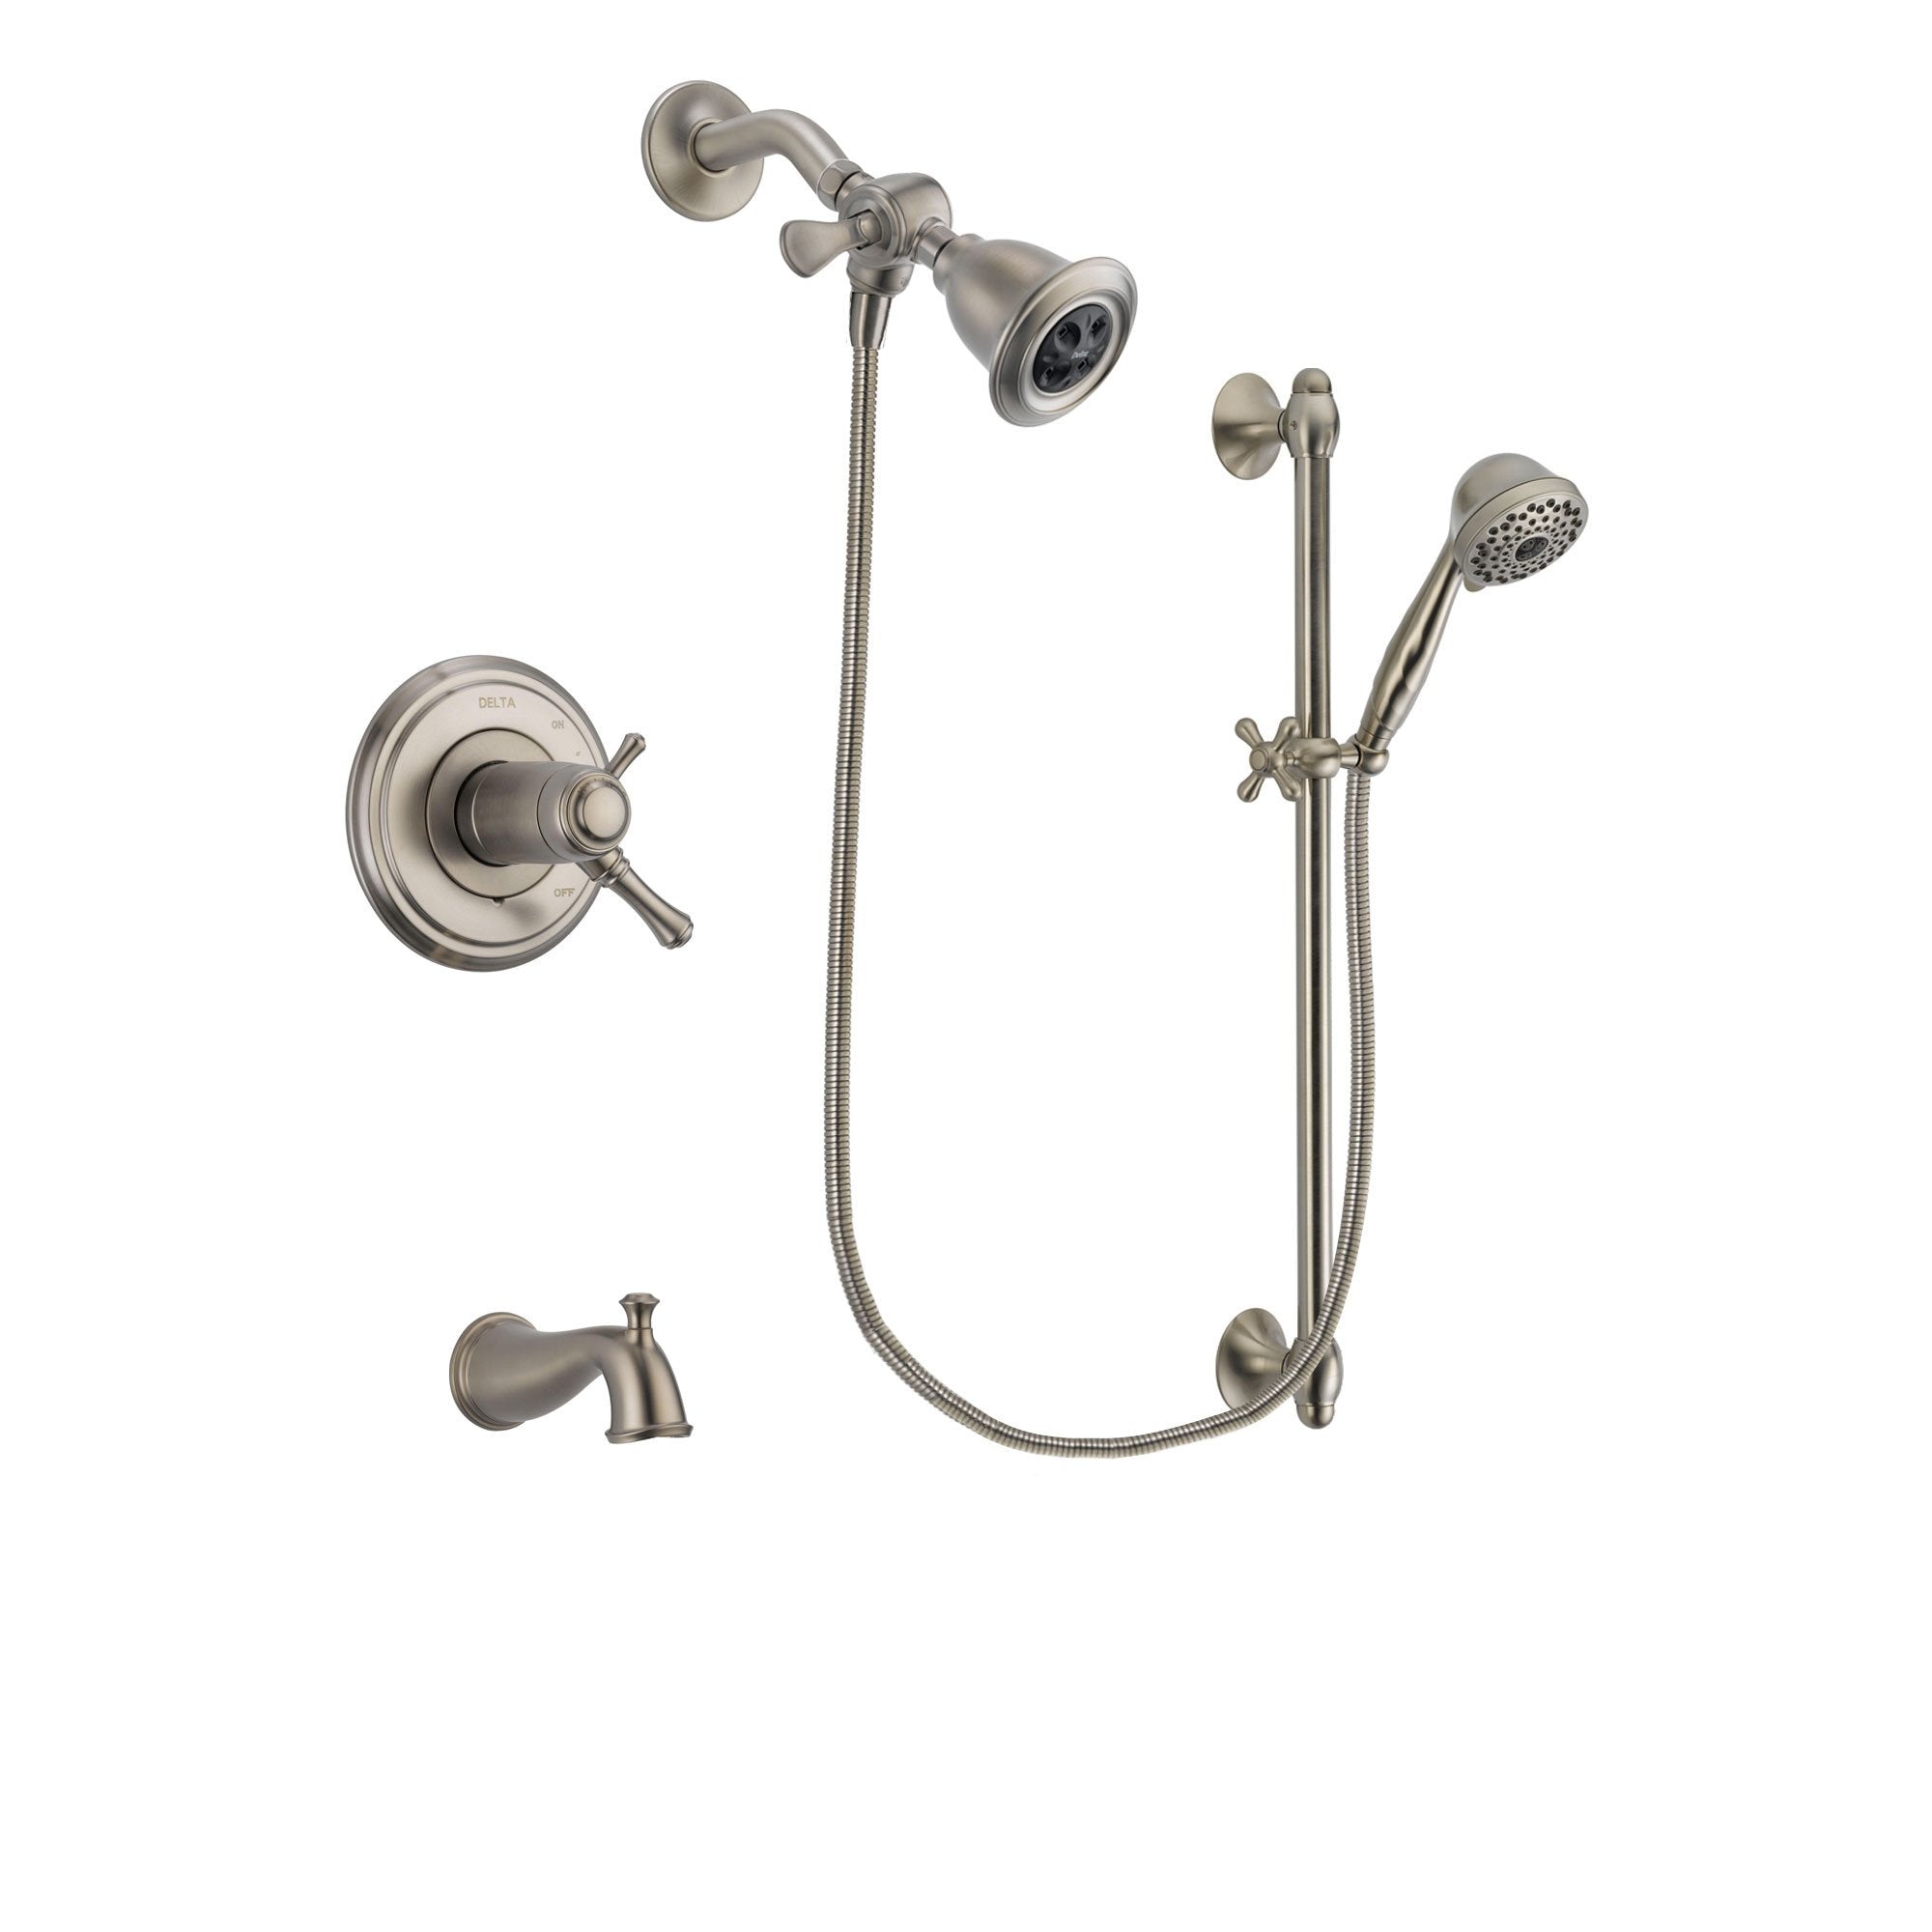 Delta Cassidy Stainless Steel Finish Thermostatic Tub and Shower Faucet System Package with Water Efficient Showerhead and 7-Spray Handheld Shower with Slide Bar Includes Rough-in Valve and Tub Spout DSP1691V